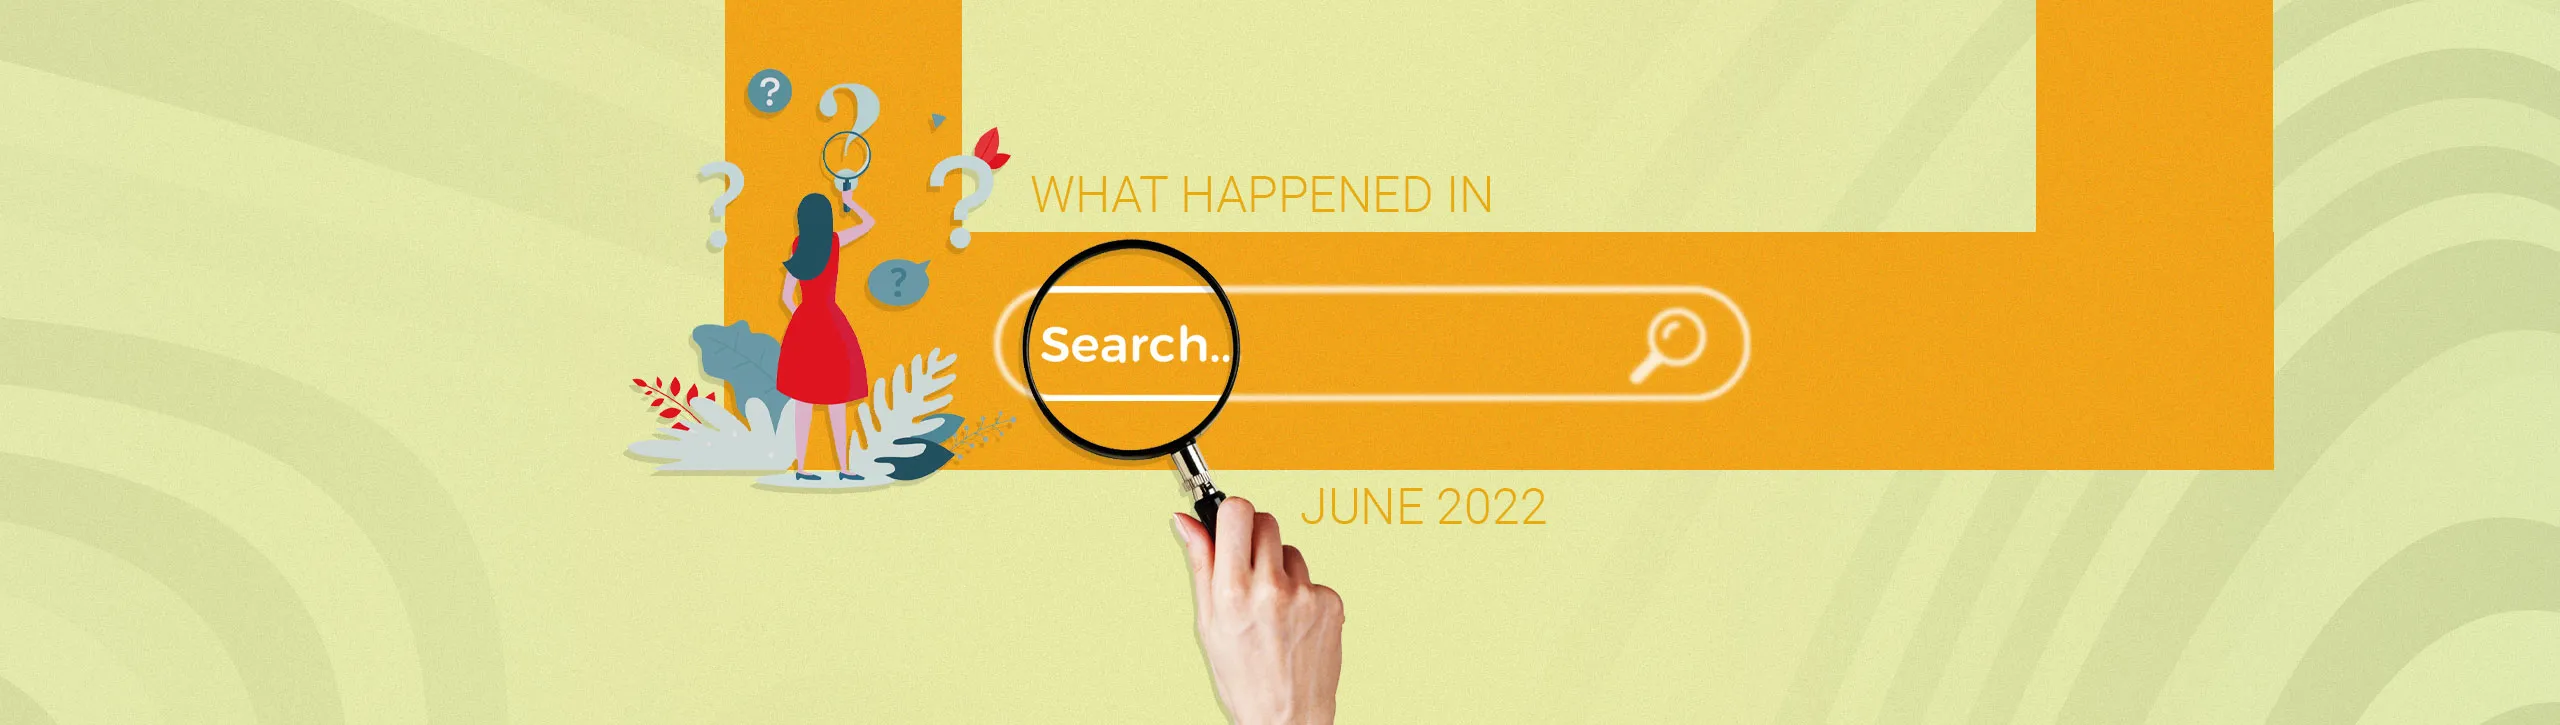 What happened in search June 2022